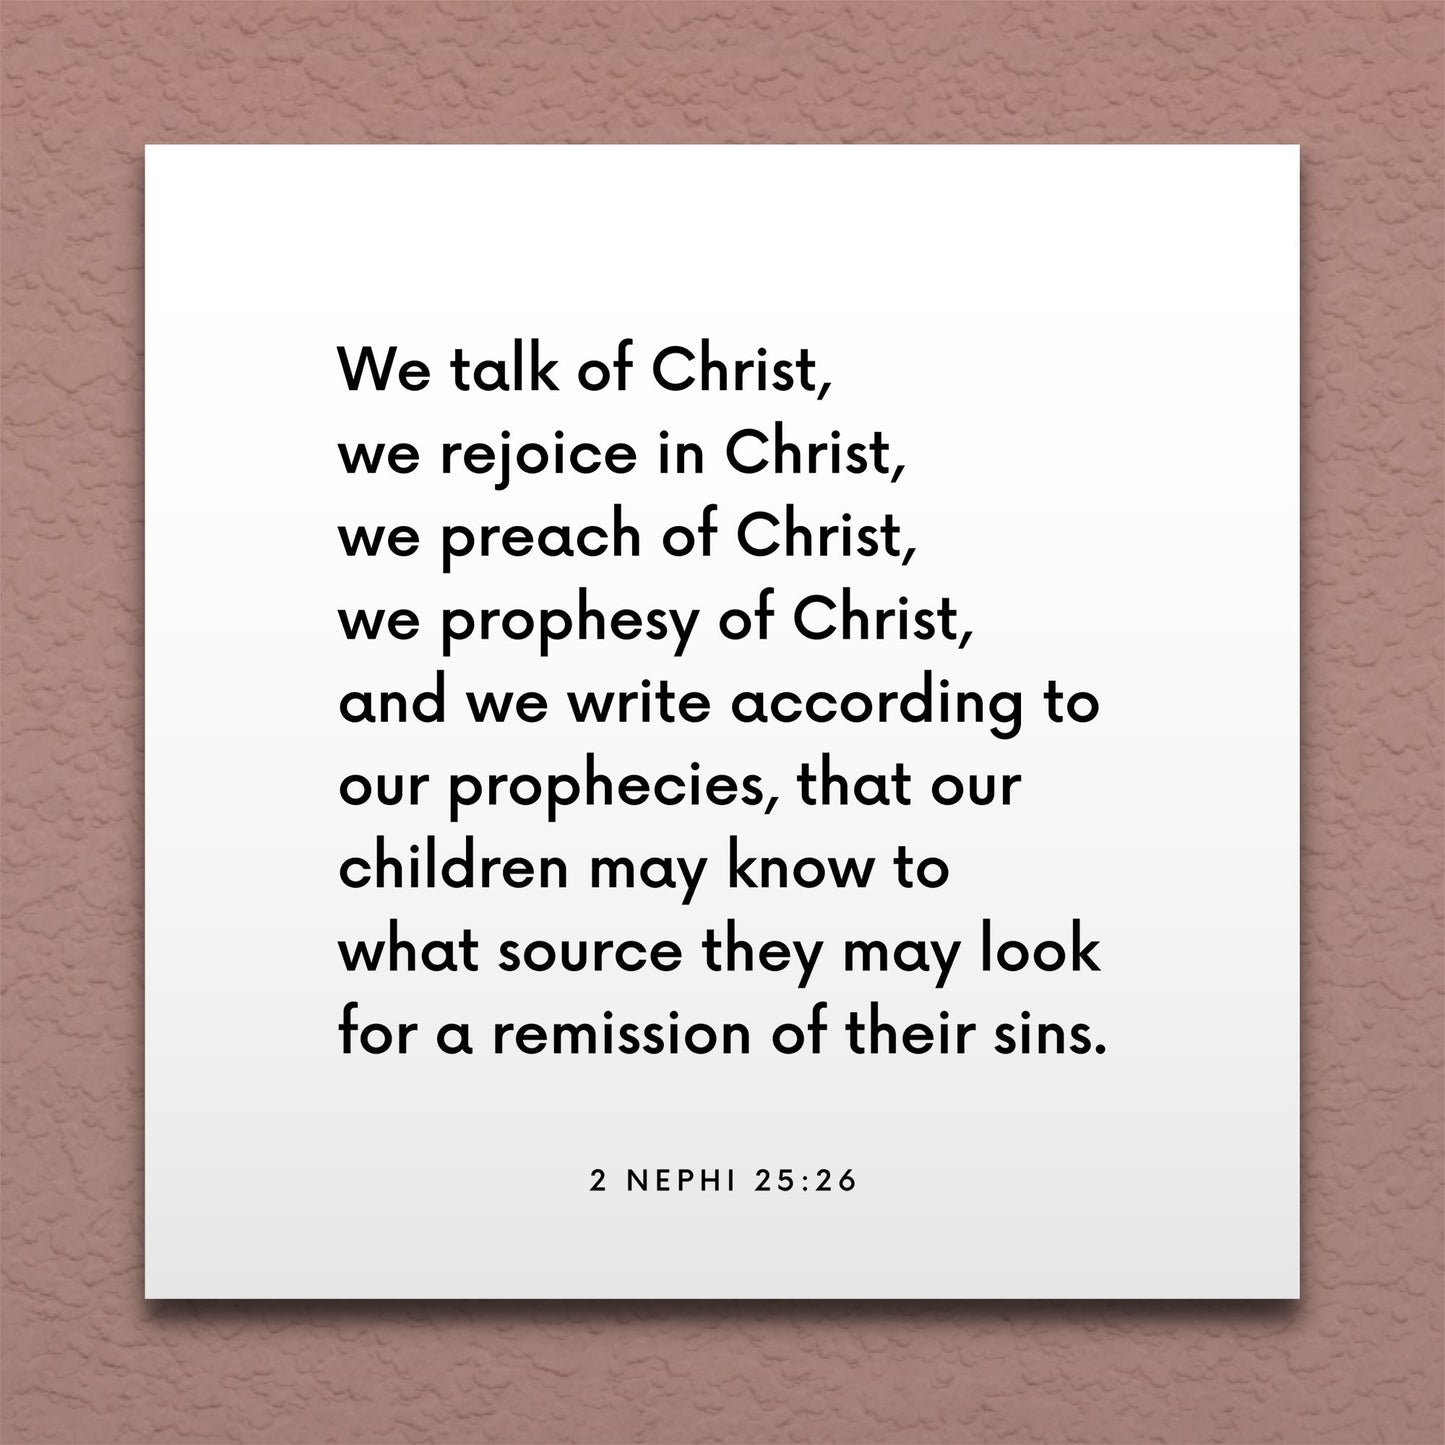 Wall-mounted scripture tile for 2 Nephi 25:26 - "We talk of Christ, we rejoice in Christ"